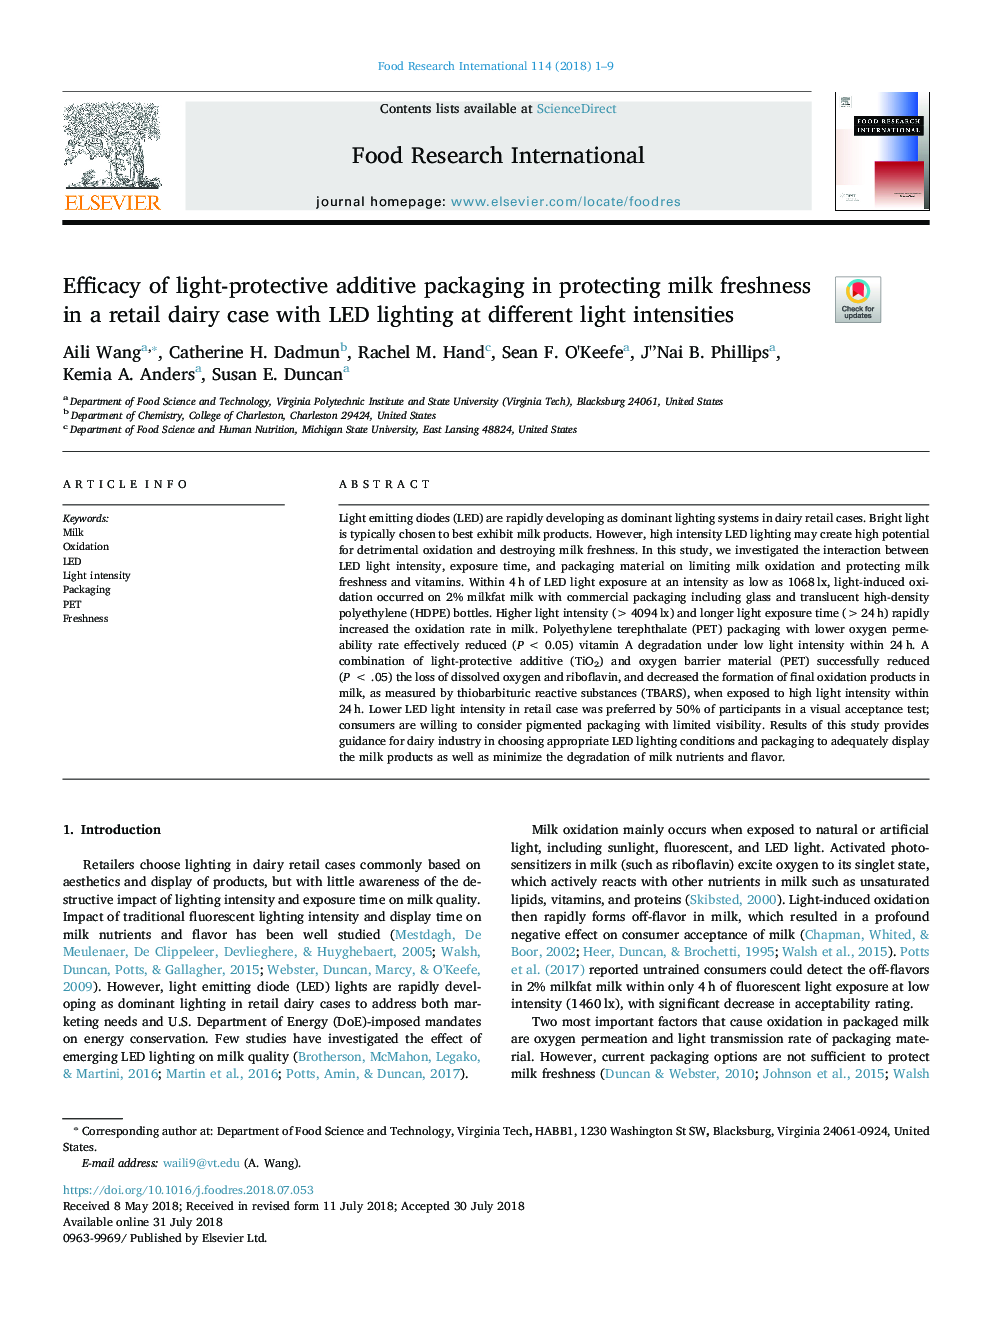 Efficacy of light-protective additive packaging in protecting milk freshness in a retail dairy case with LED lighting at different light intensities